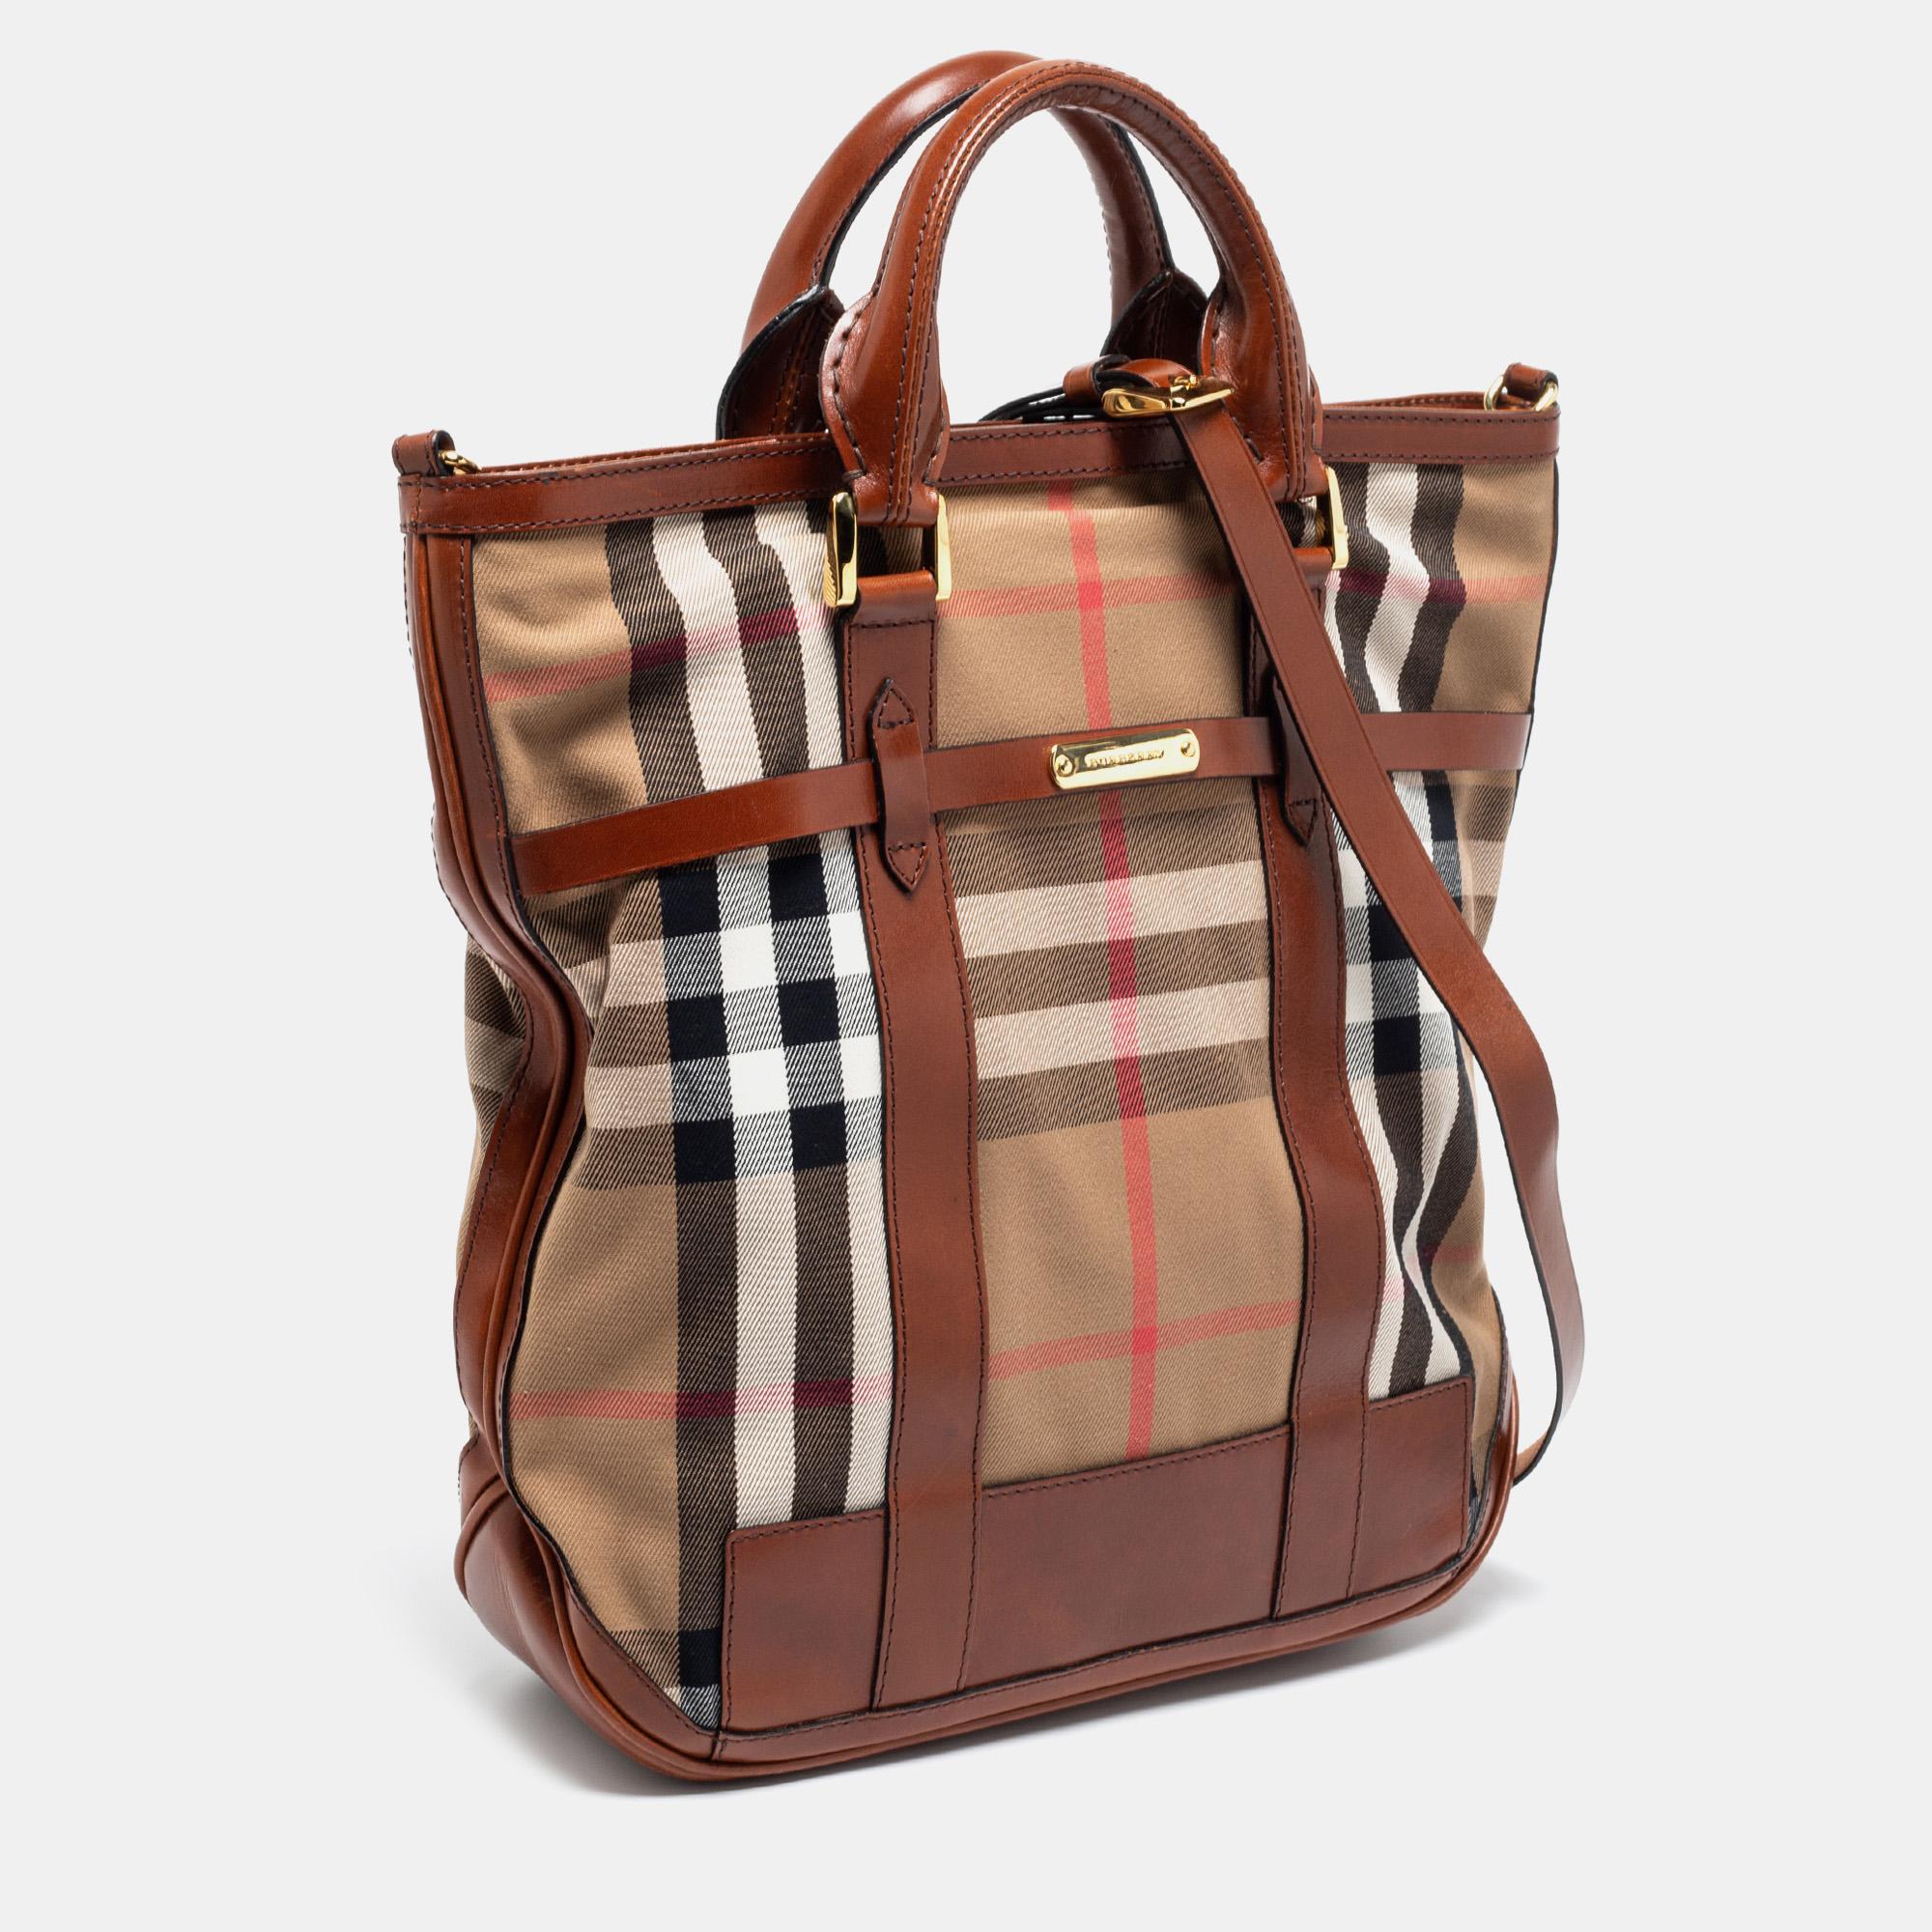 burberry medium check and leather tote